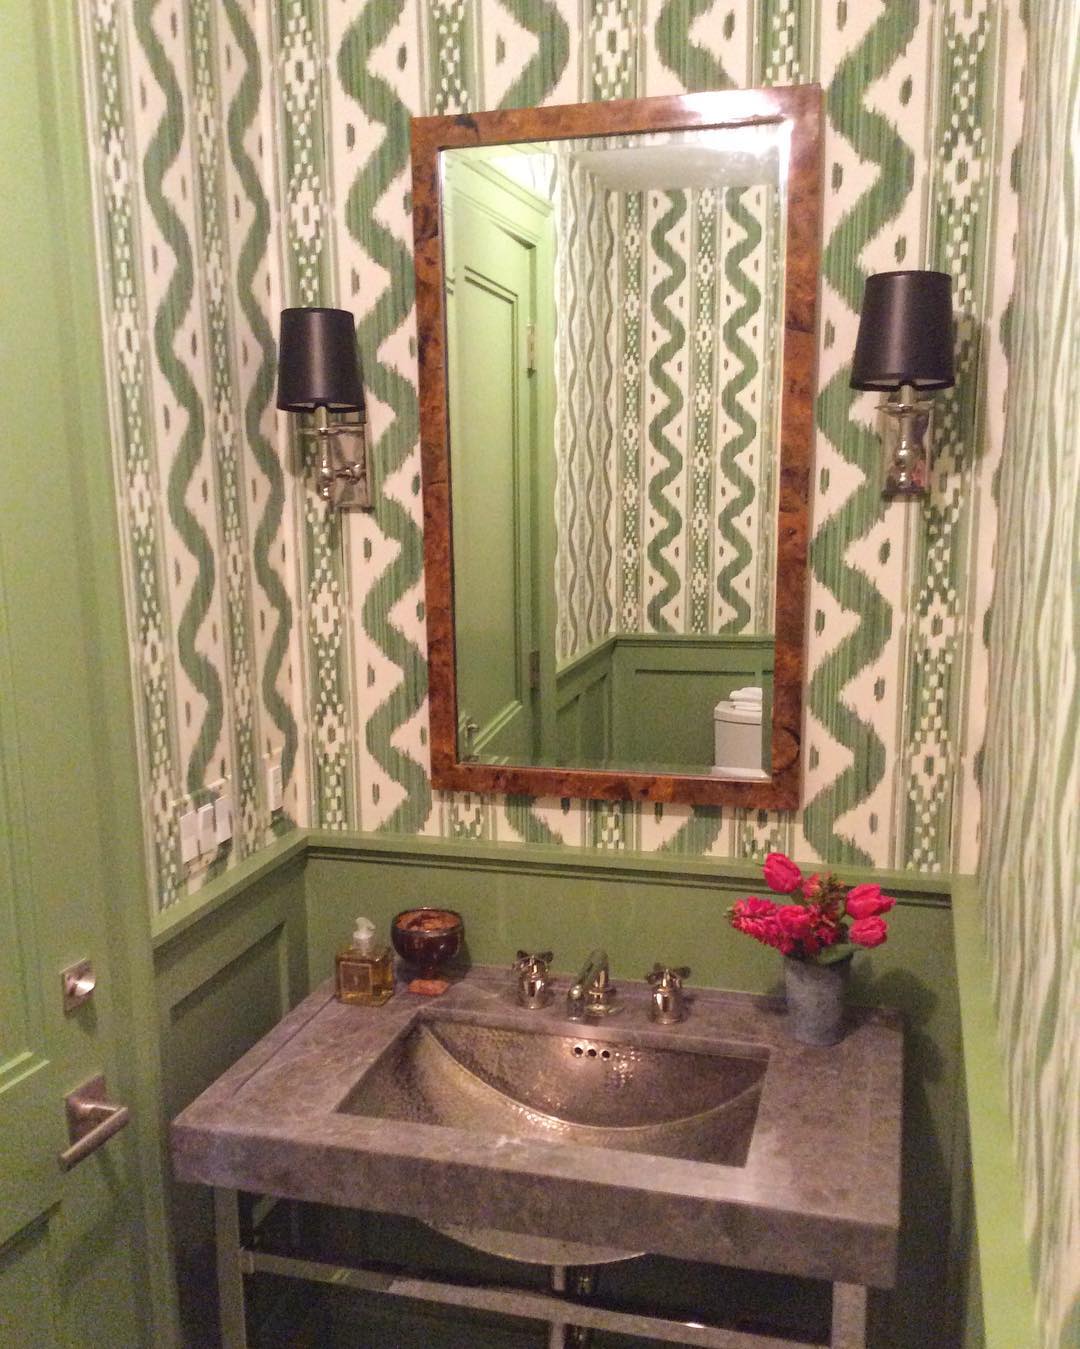 Green color scheme for this bathroom with green painted wainscoting and green and white wallpaper.